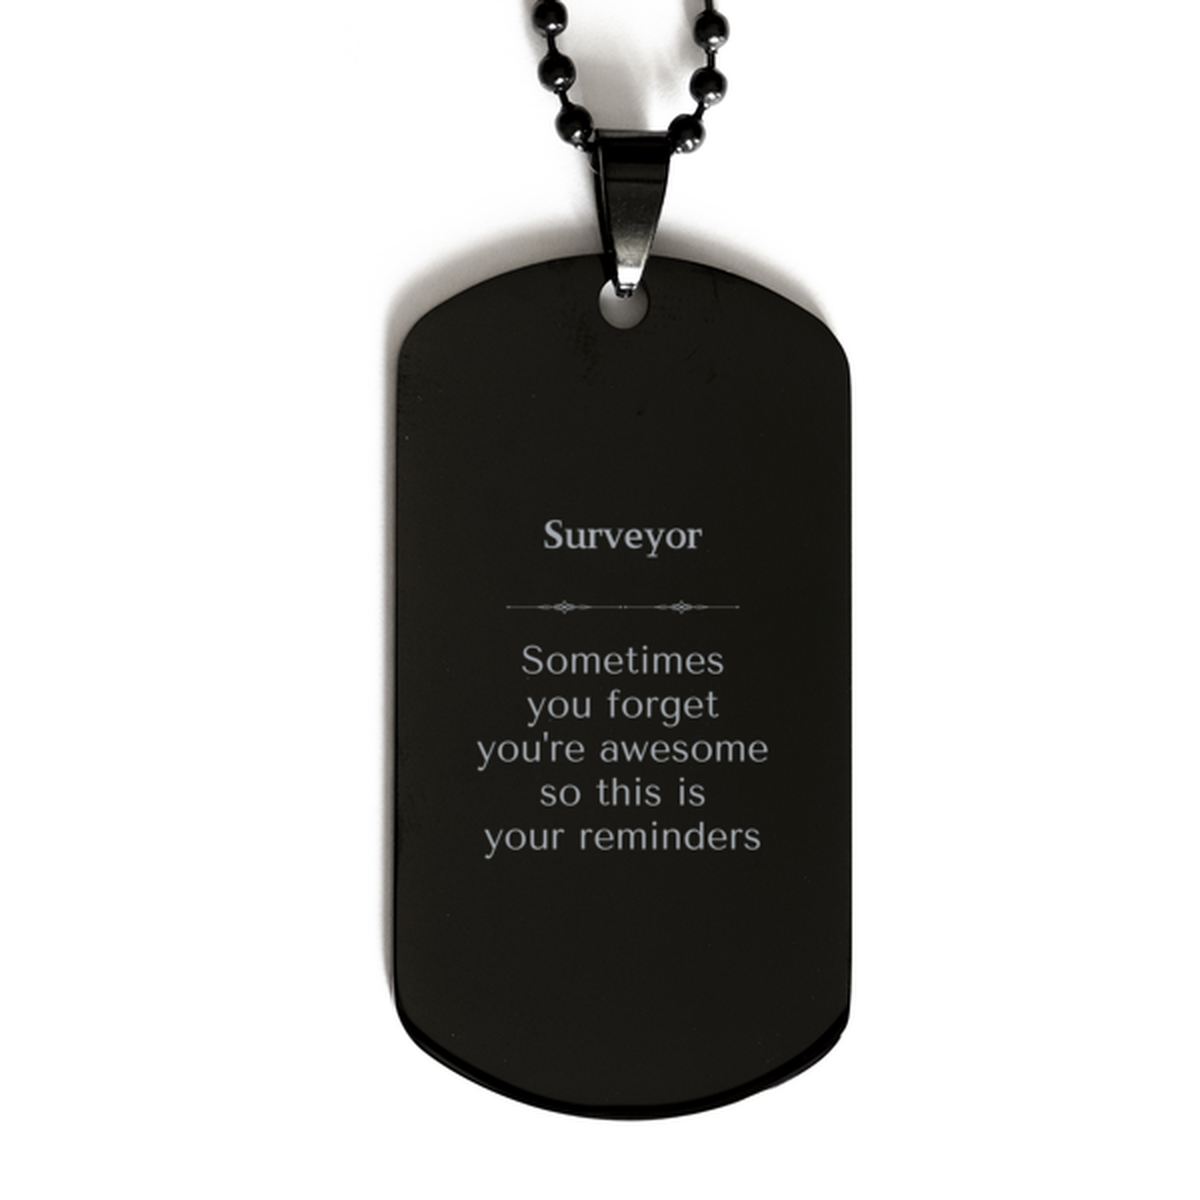 Sentimental Surveyor Black Dog Tag, Surveyor Sometimes you forget you're awesome so this is your reminders, Graduation Christmas Birthday Gifts for Surveyor, Men, Women, Coworkers